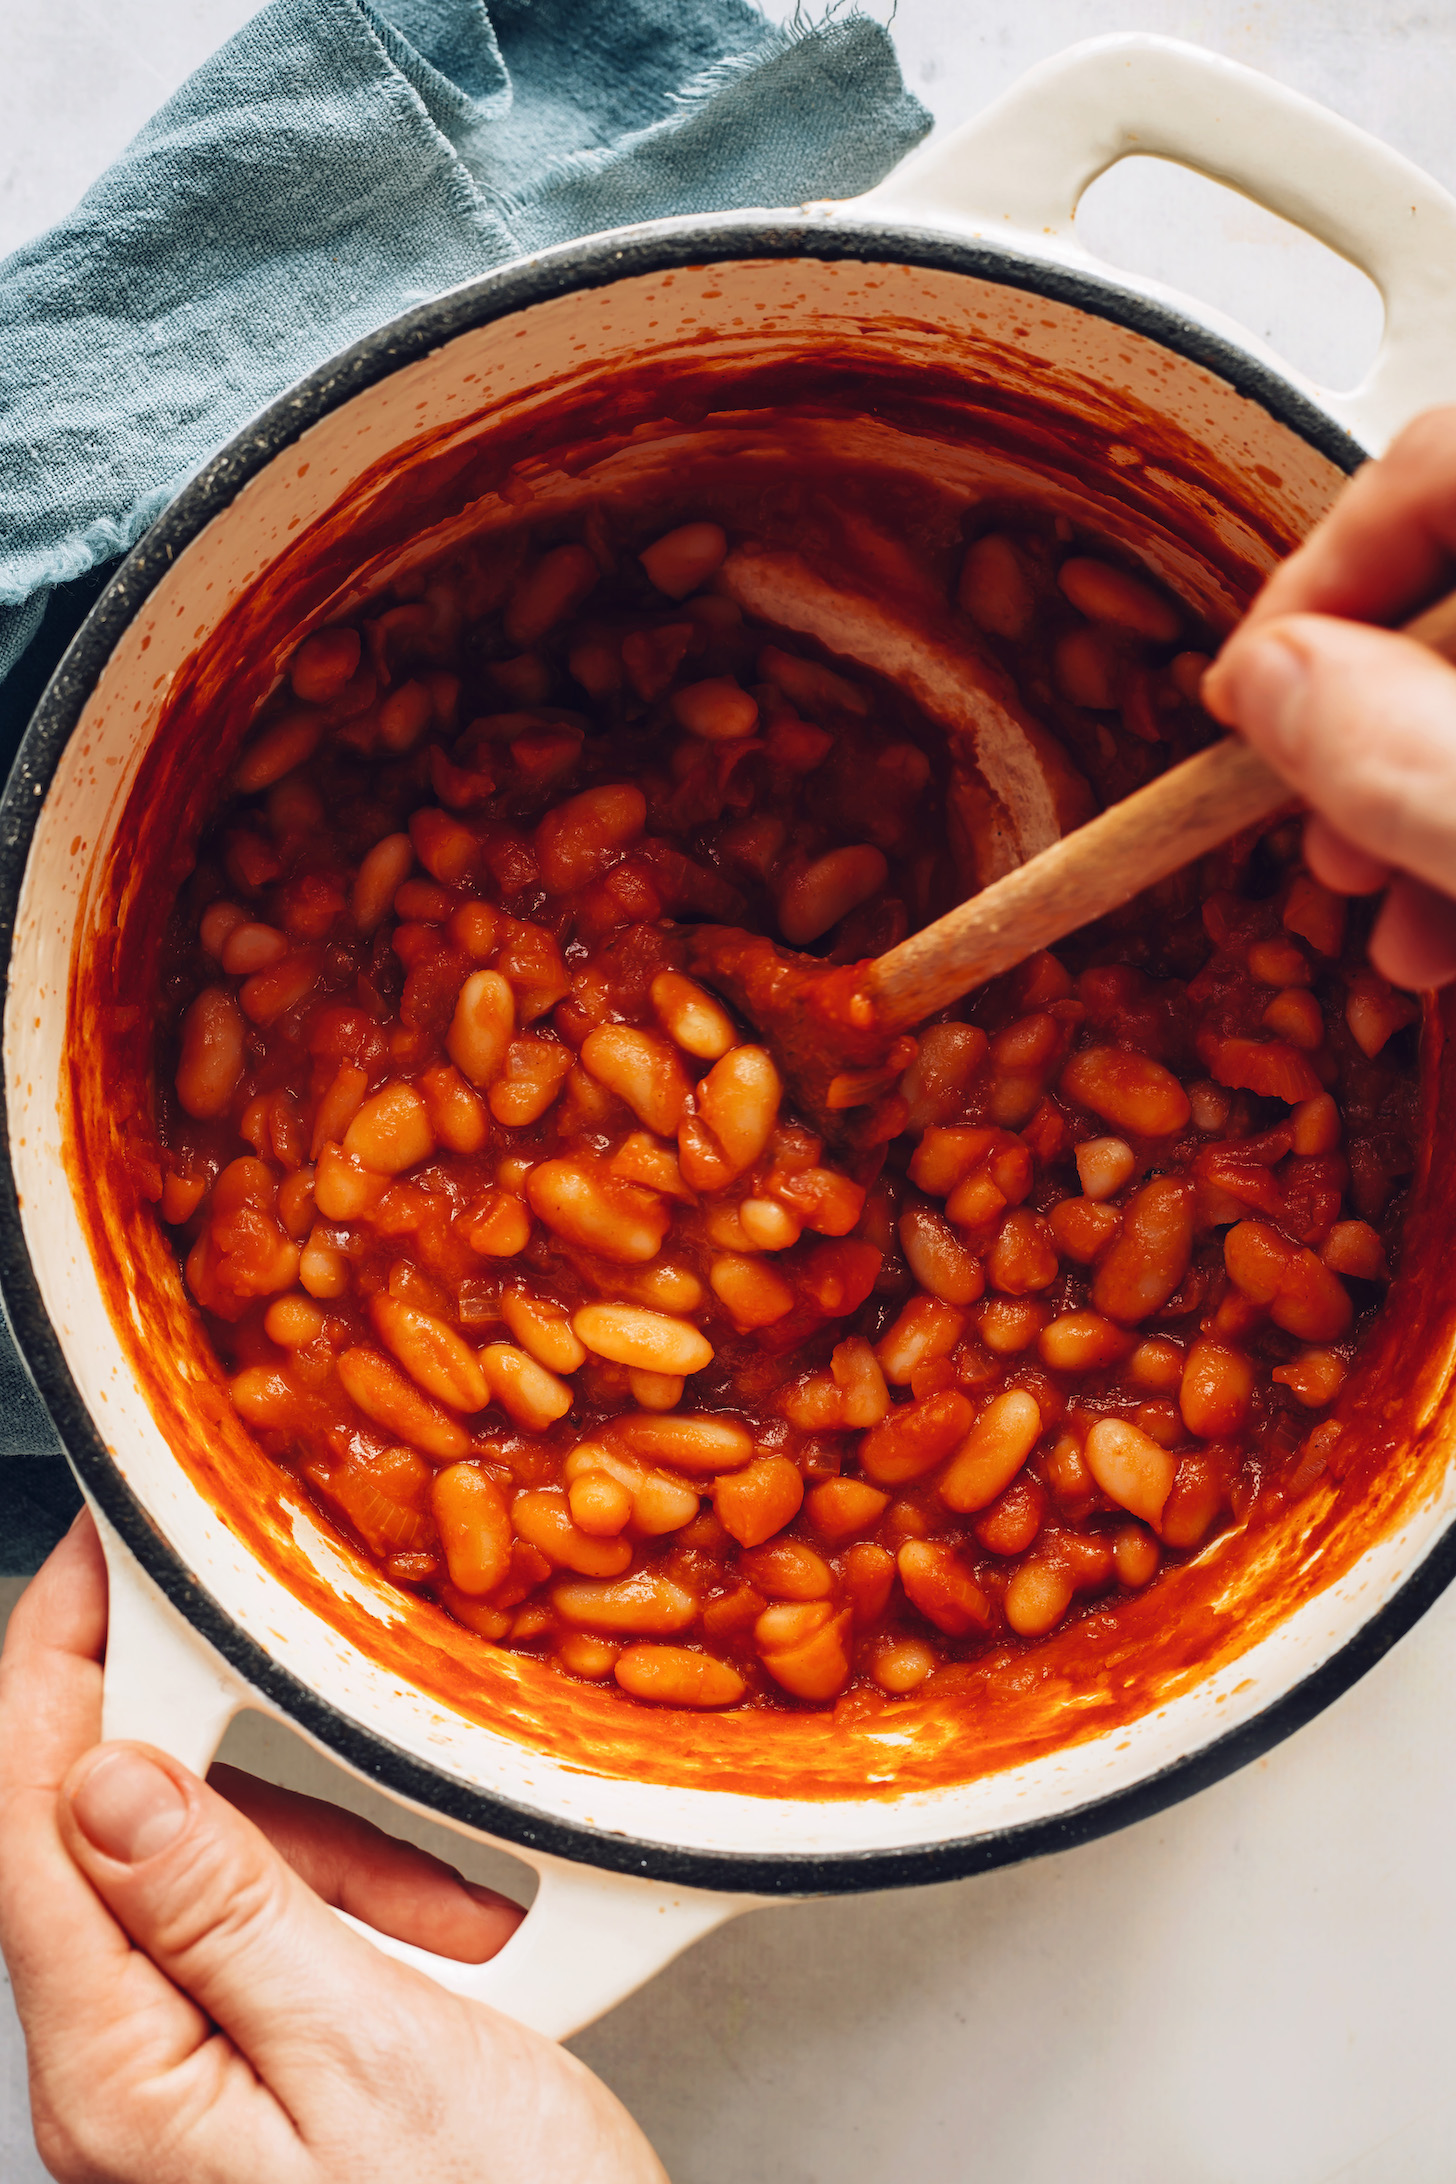 Stirring a pot of baked beans